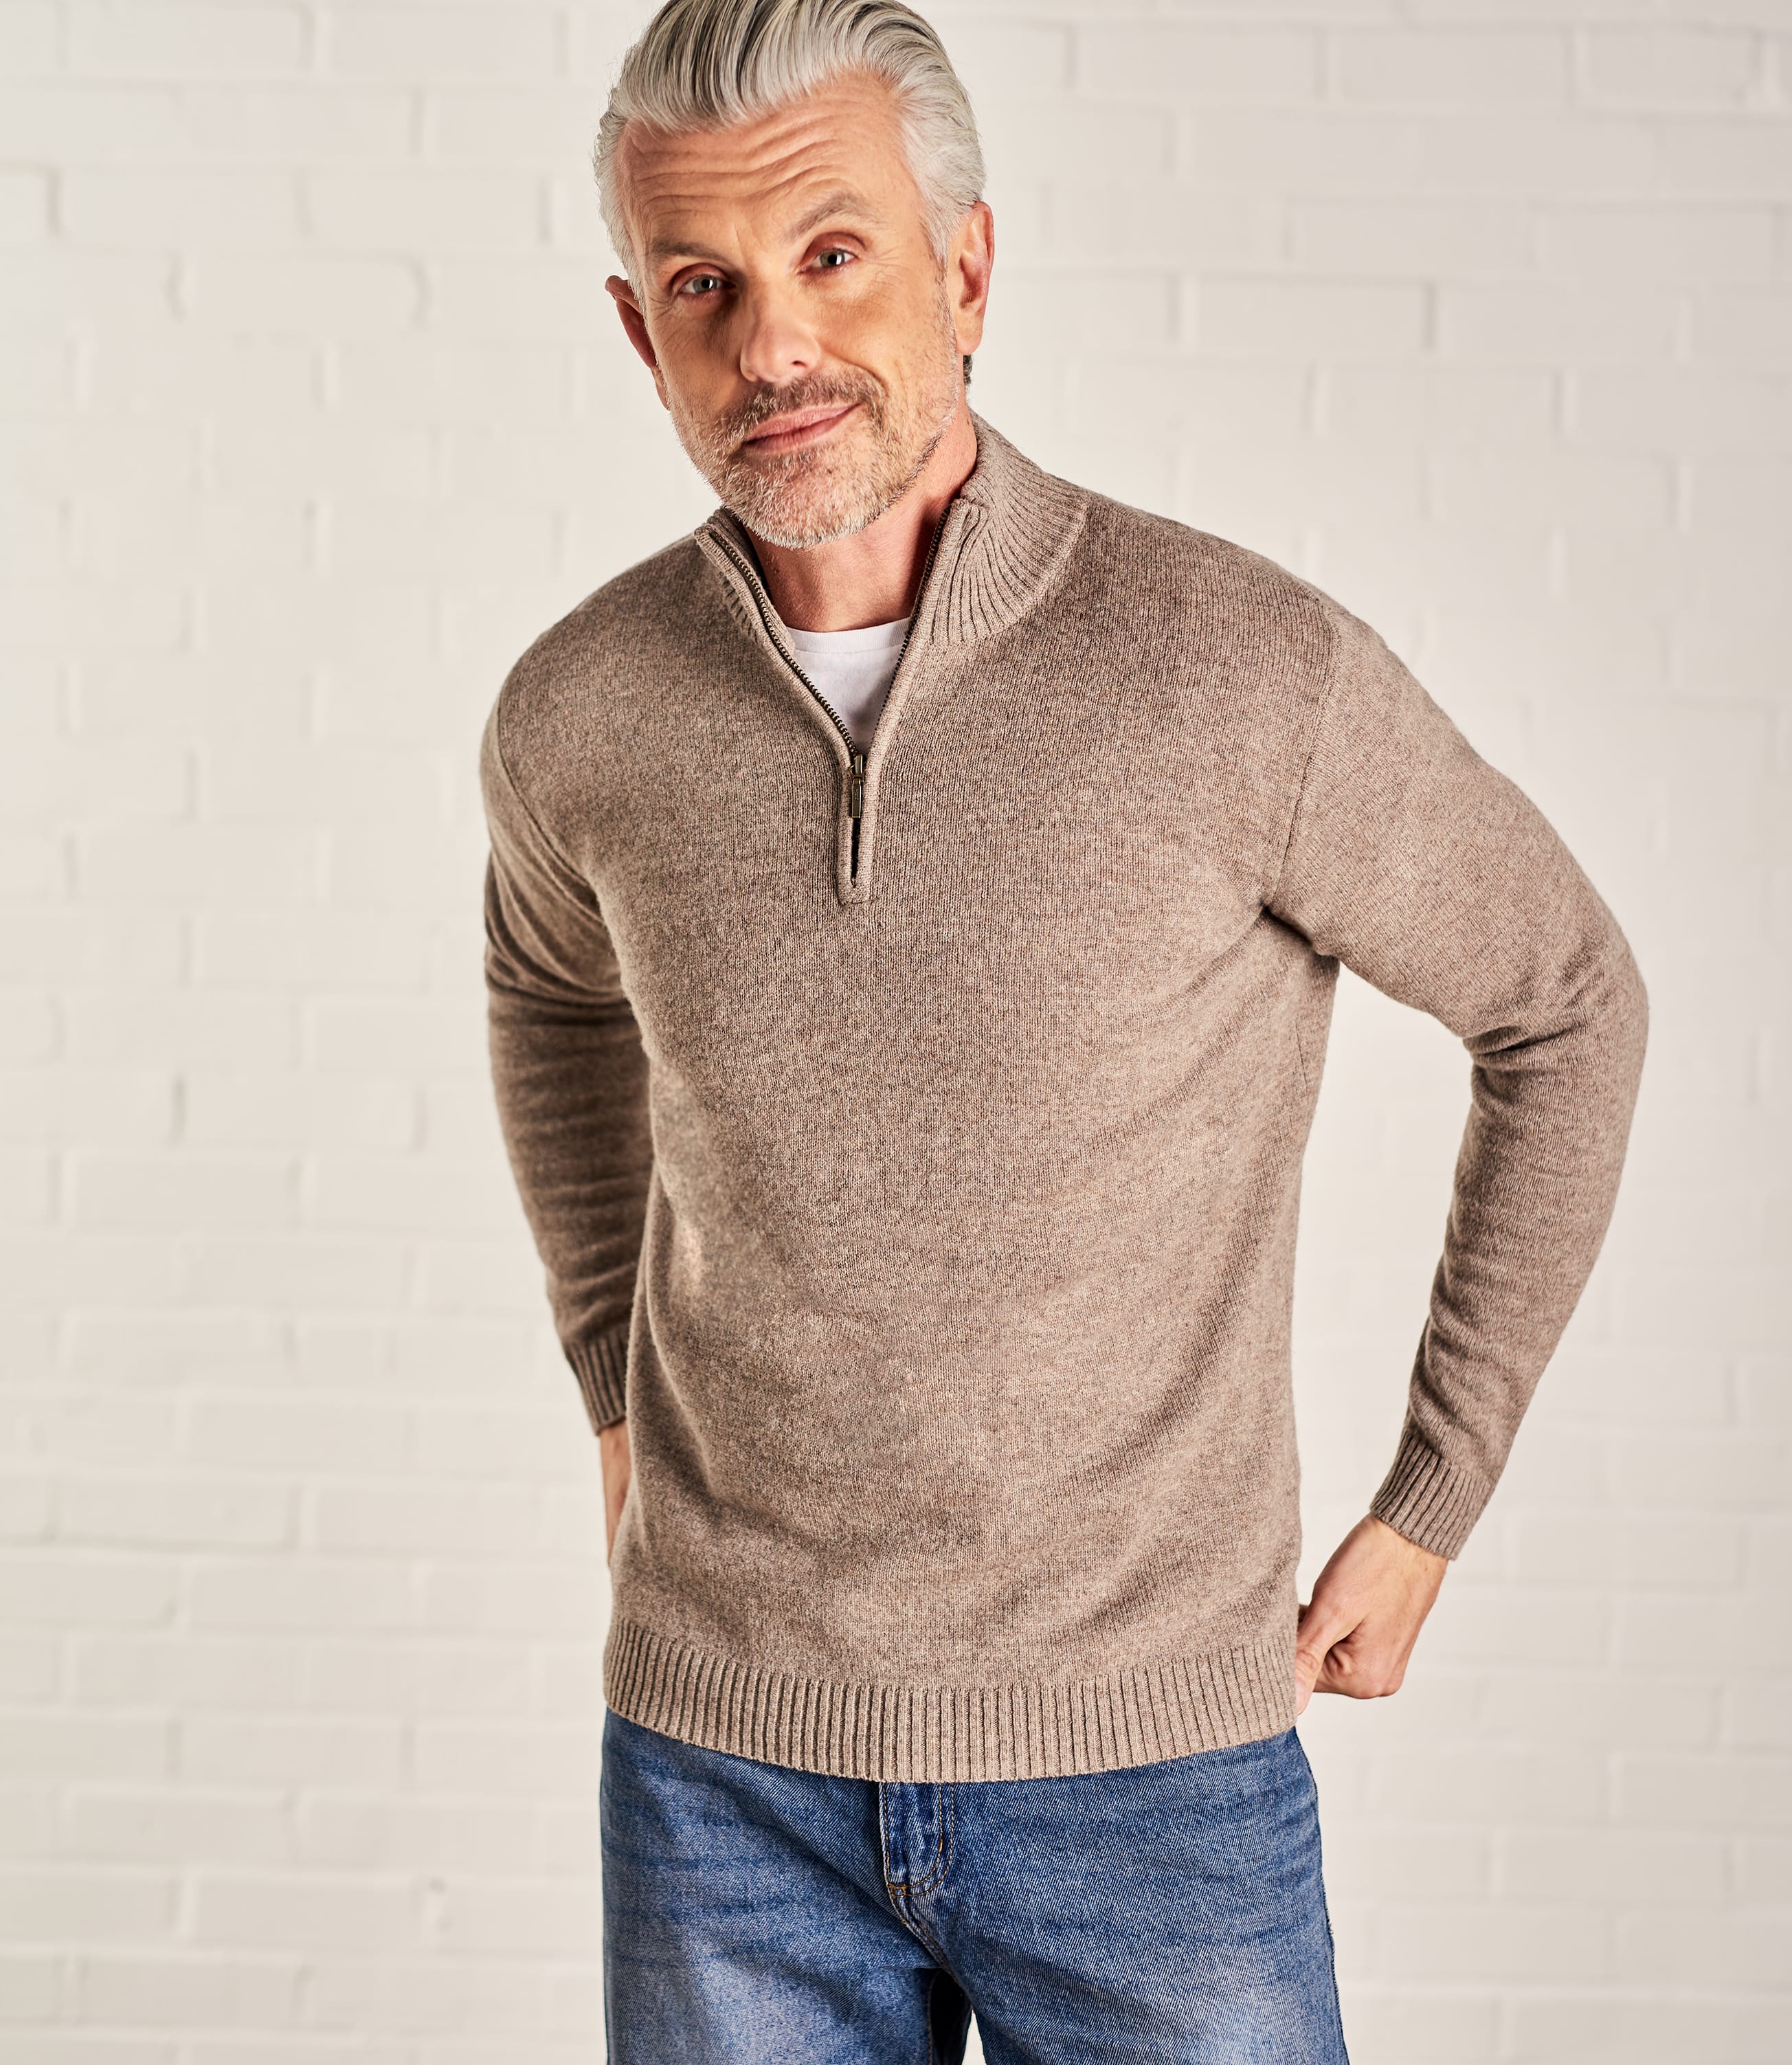 Mens Jumpers & Sweaters | Jumpers for Men | WoolOvers UK